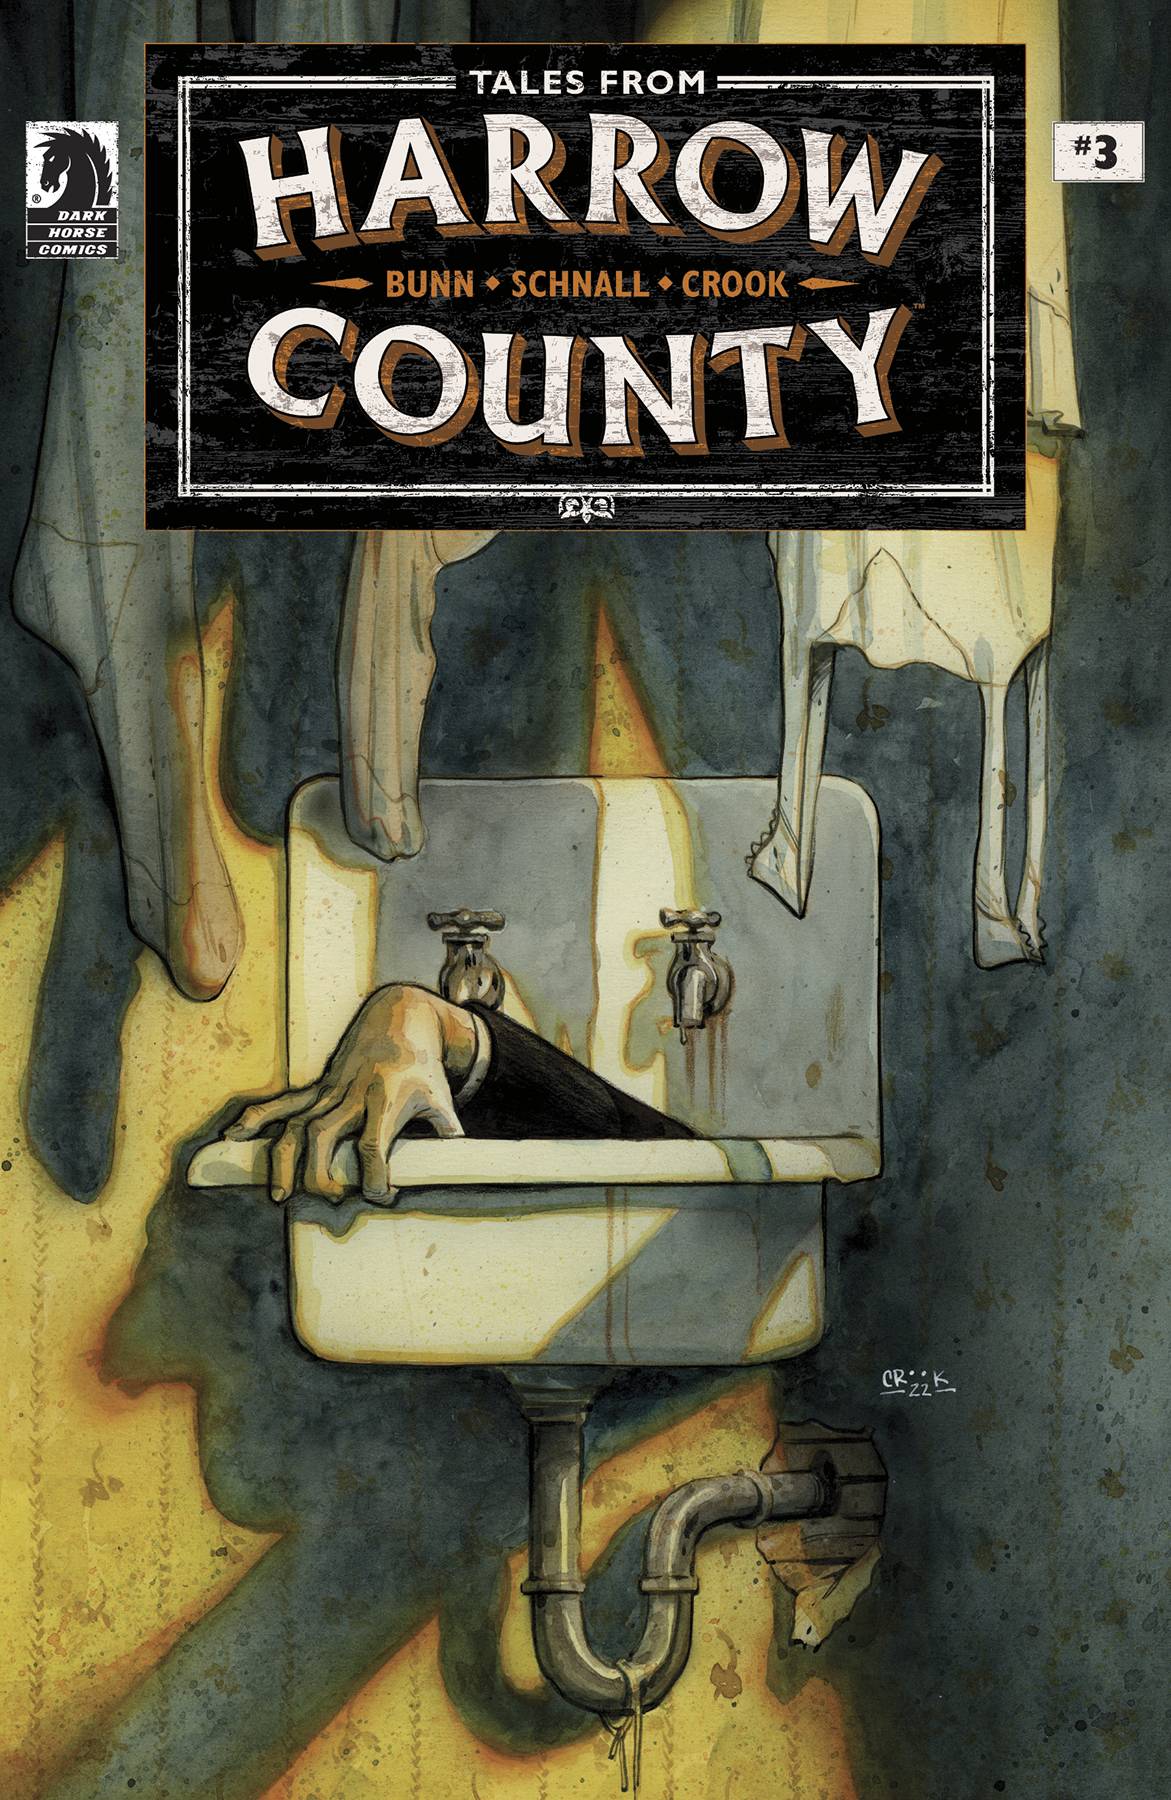 TALES FROM HARROW COUNTY LOST ONES #3 (OF 4) CVR B CROOK